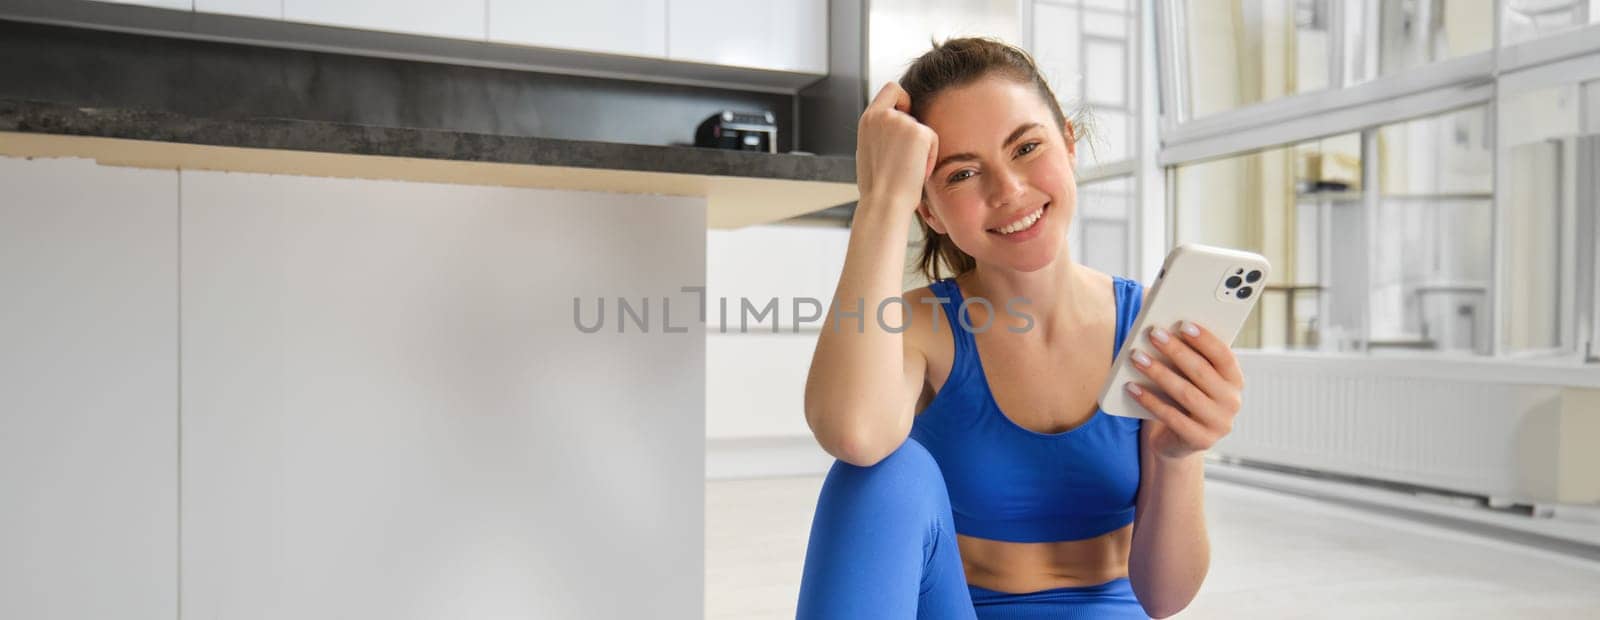 Young woman with smartphone does workout at home, using mobile phone app for sports training indoors, wears blue sportsbra and leggings.